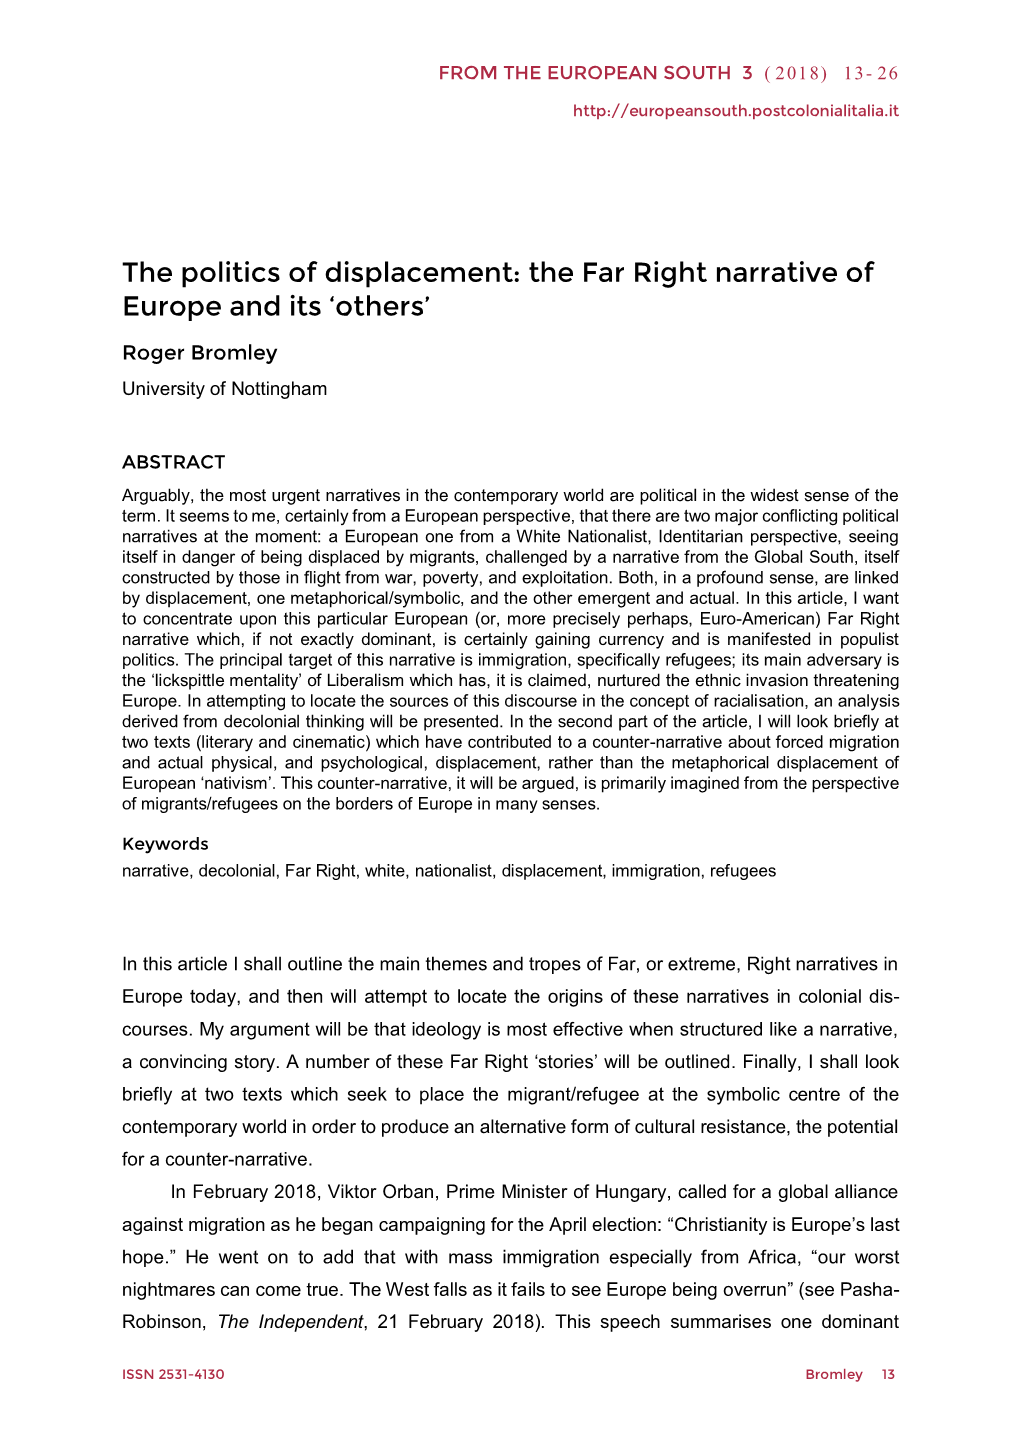 The Politics of Displacement: the Far Right Narrative of Europe and Its ‘Others’